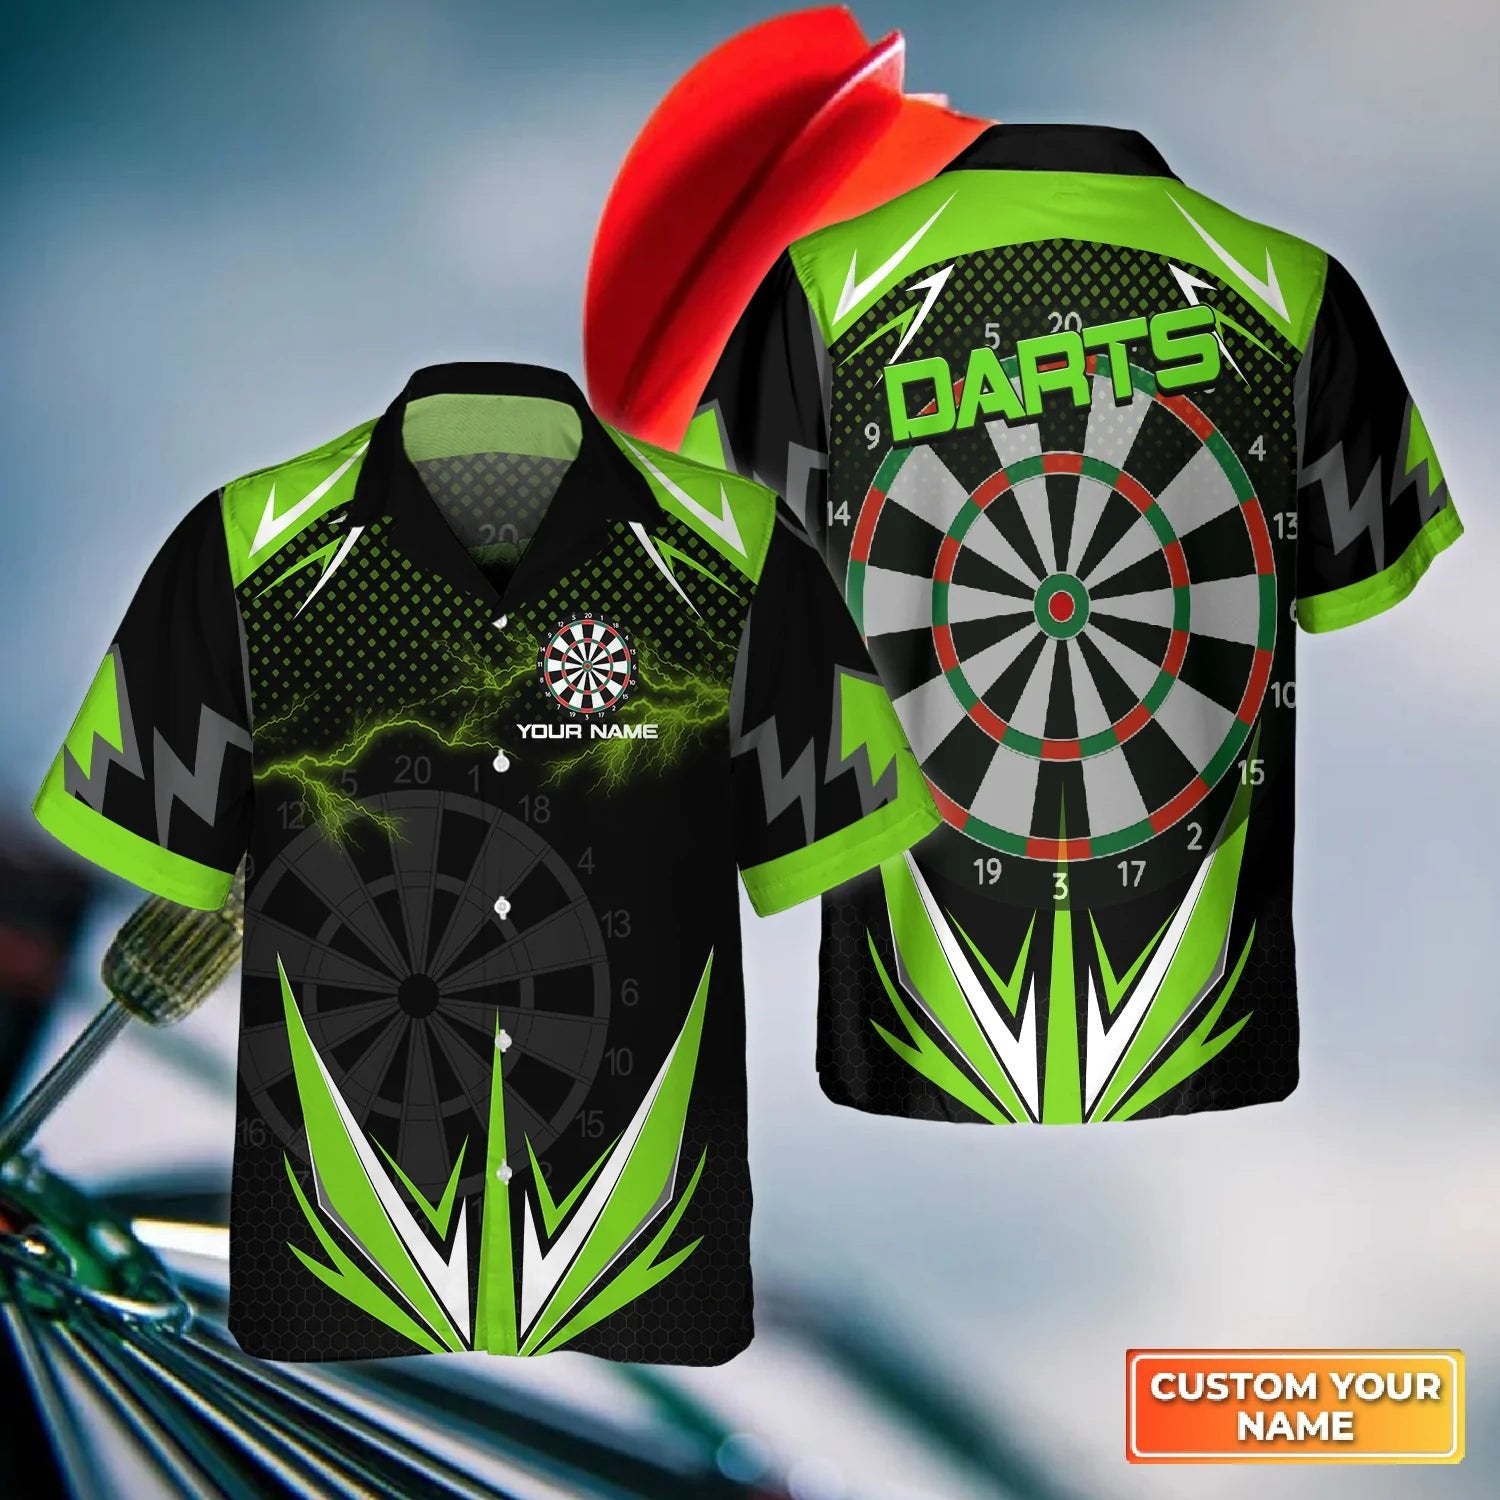 Dartboard And Arrow Blue Personalized Name 3D Hawaiian Shirt For Darts Player